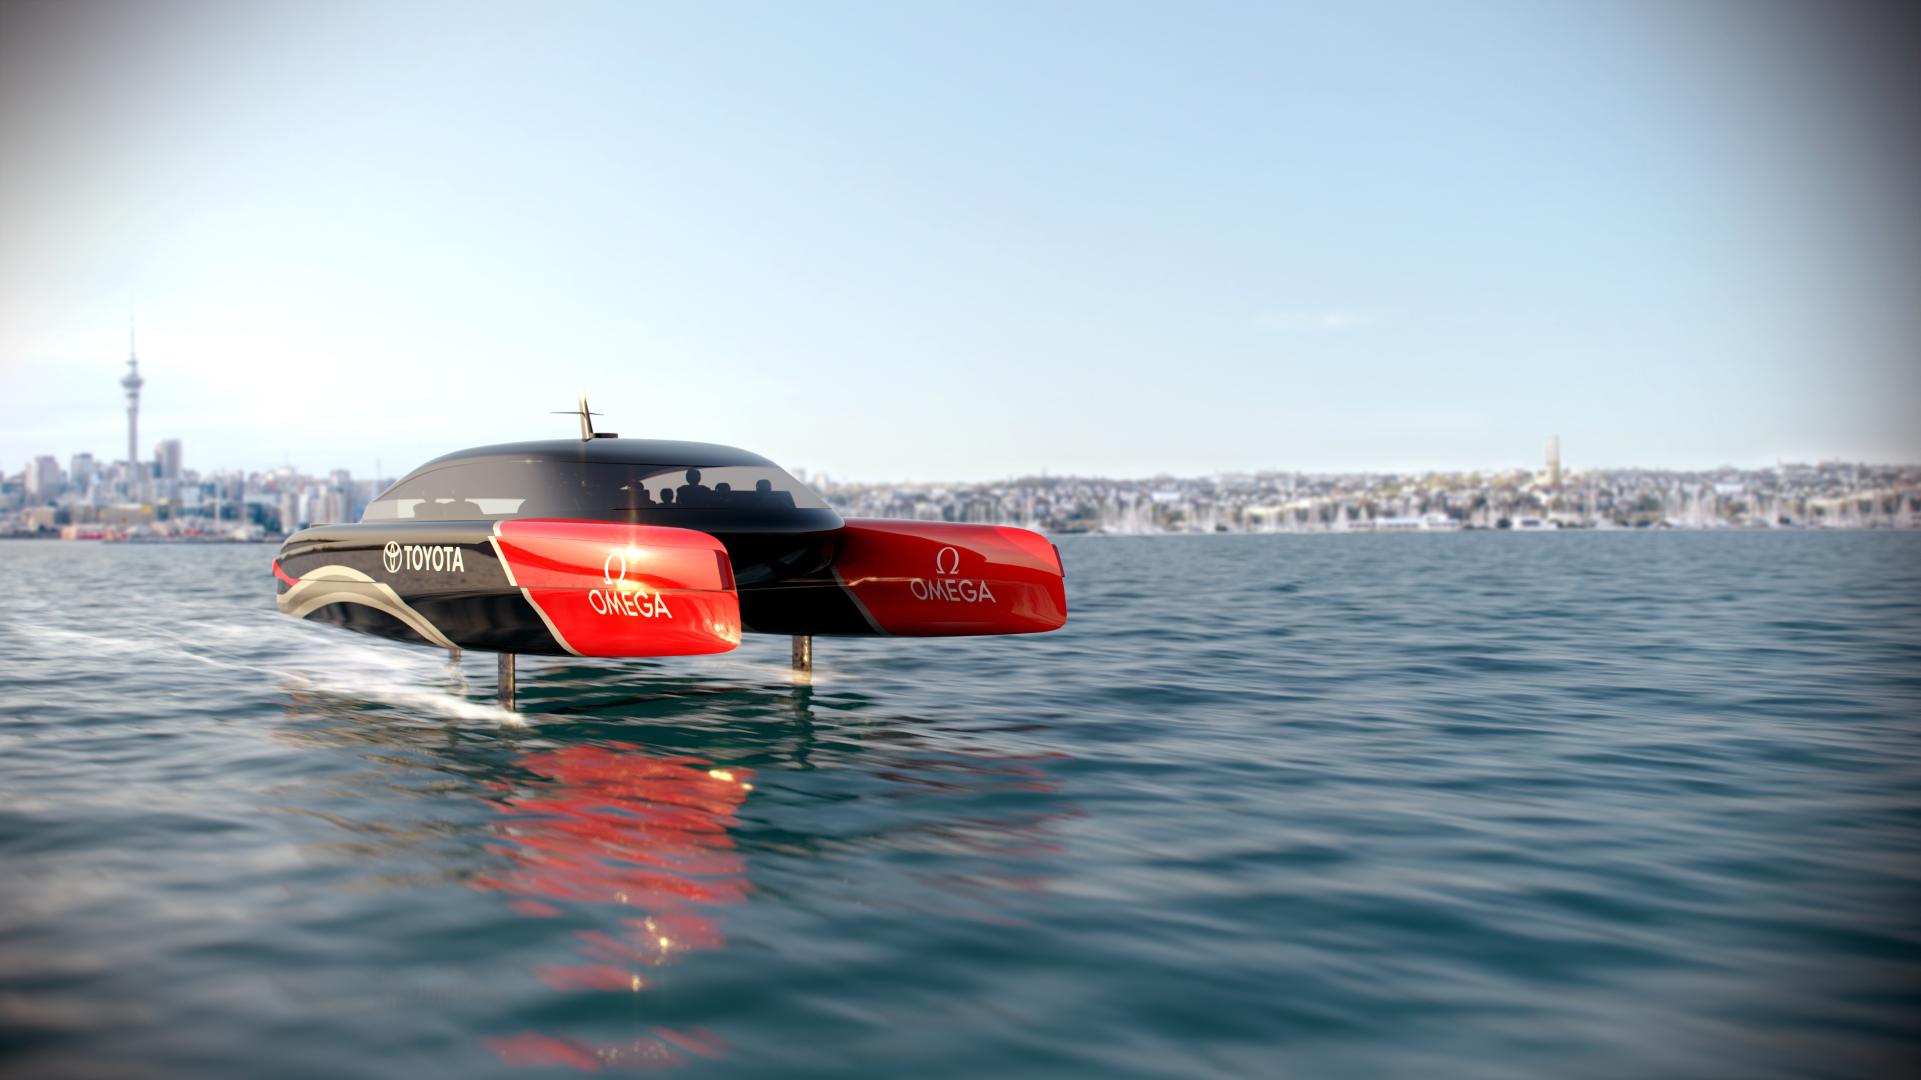 Emirates Team New Zealand to drive initiative in marine industry with Hydrogen innovation